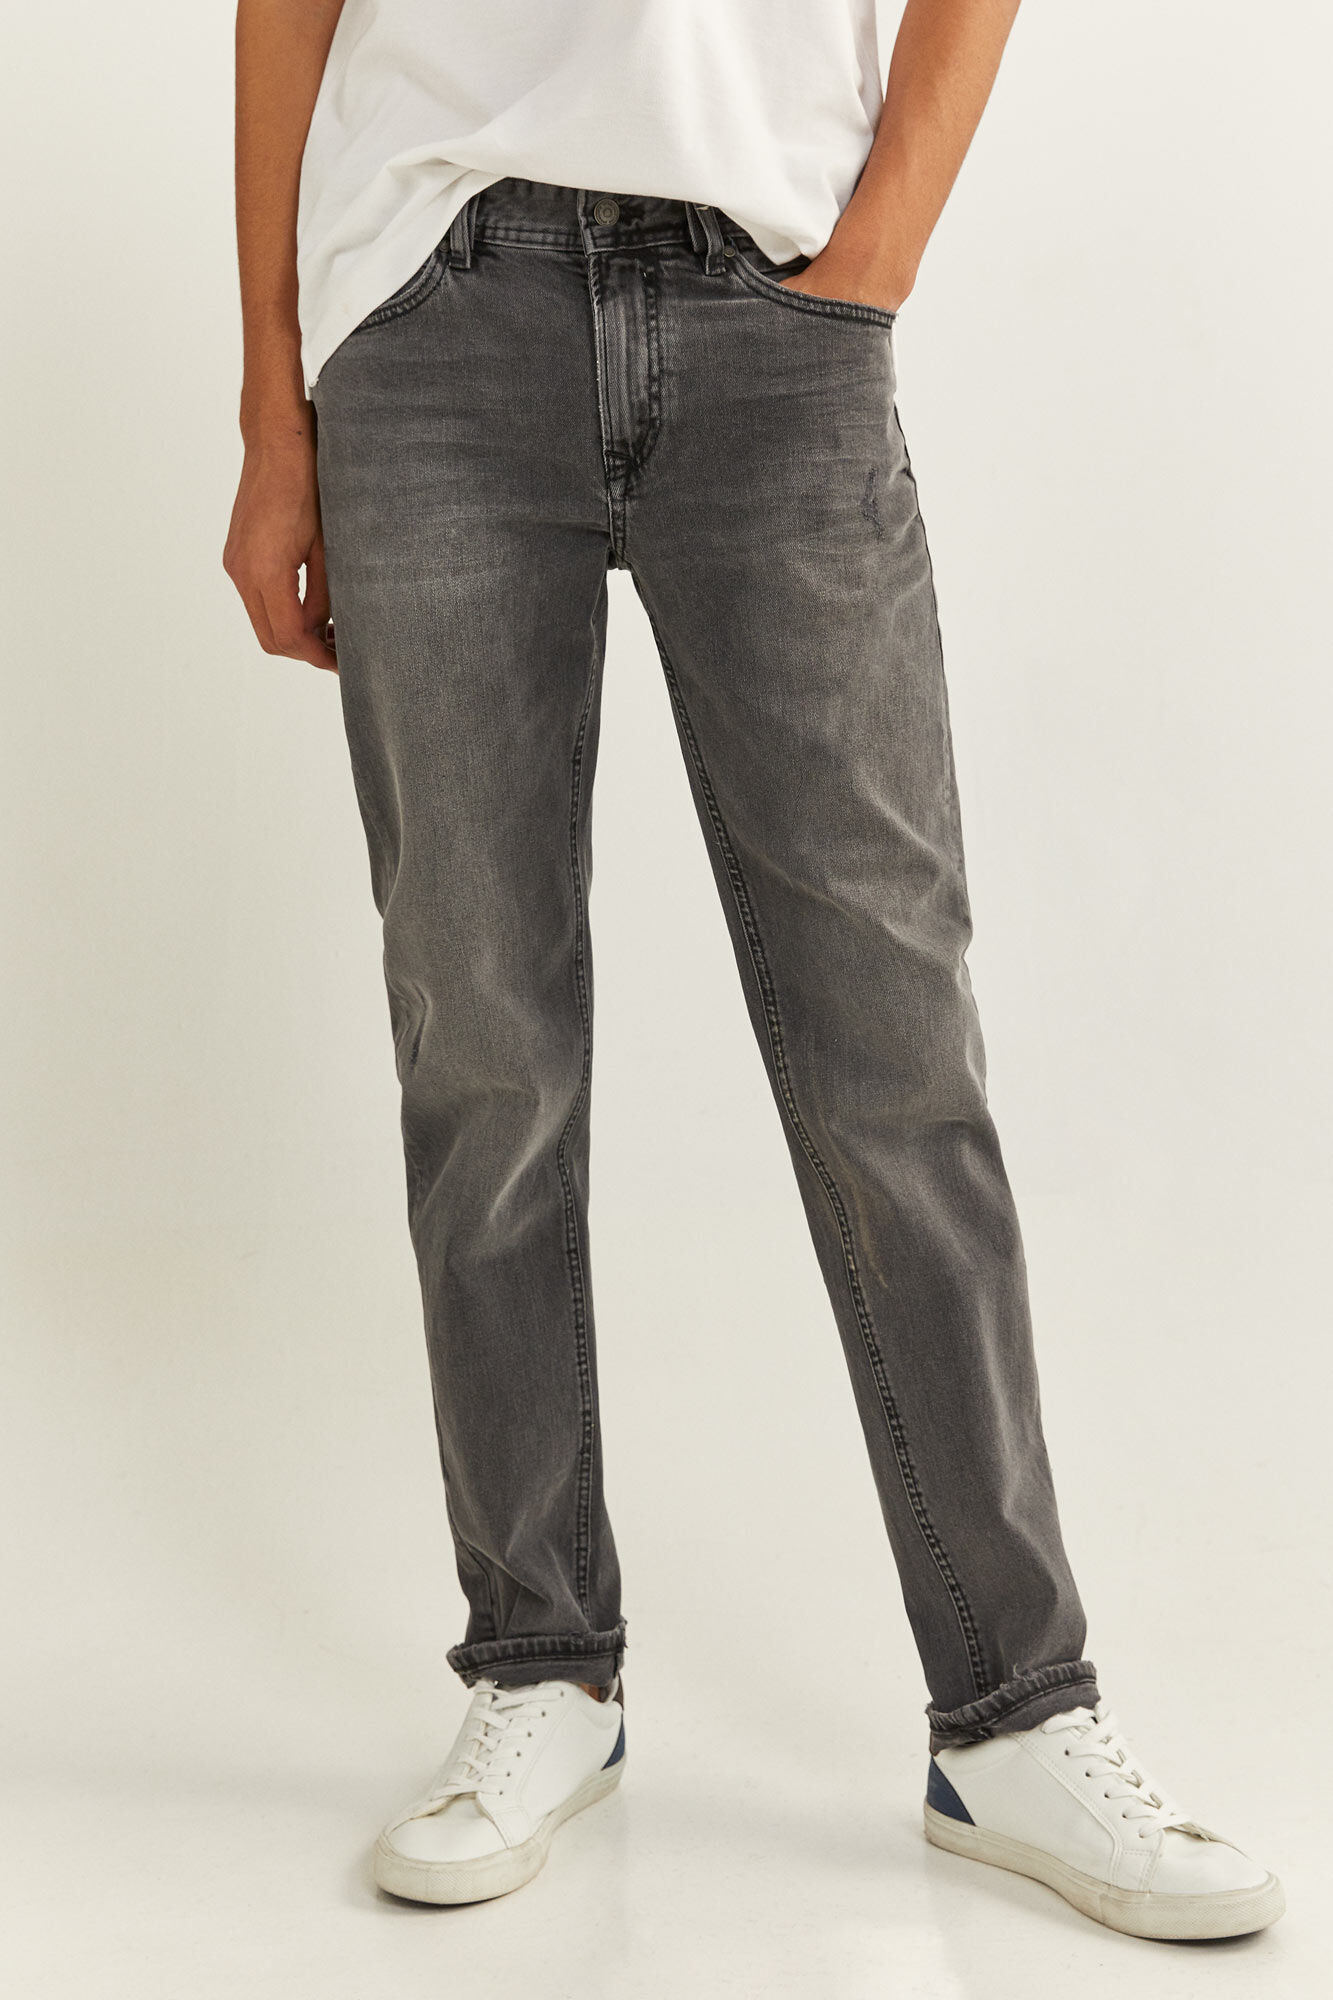 Men's jeans and denim | Red Prices 